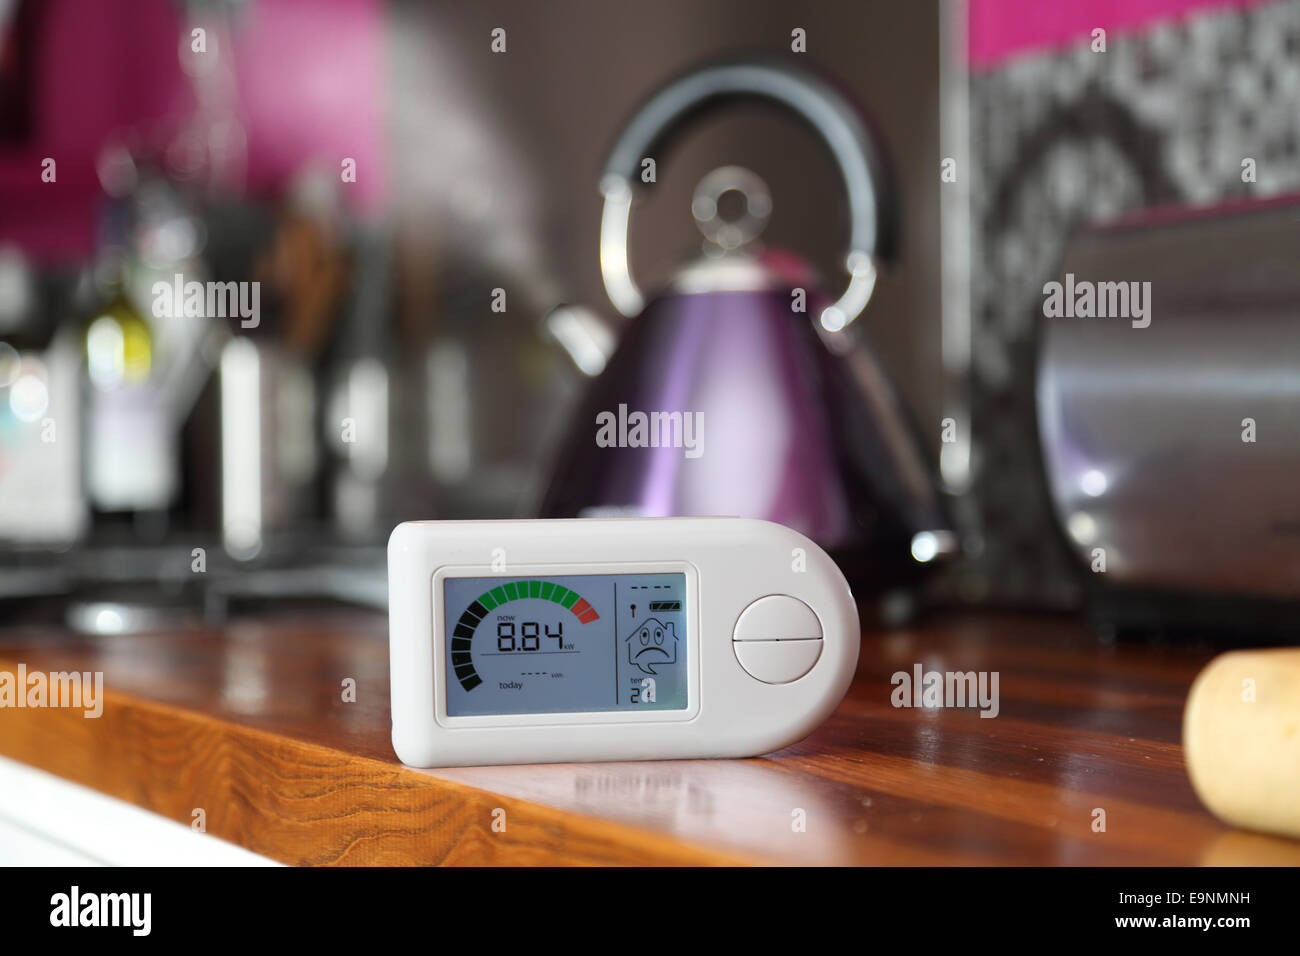 A domestic electricity monitor in a kitchen showing a high level of energy consumption - 8.84Kw Stock Photo